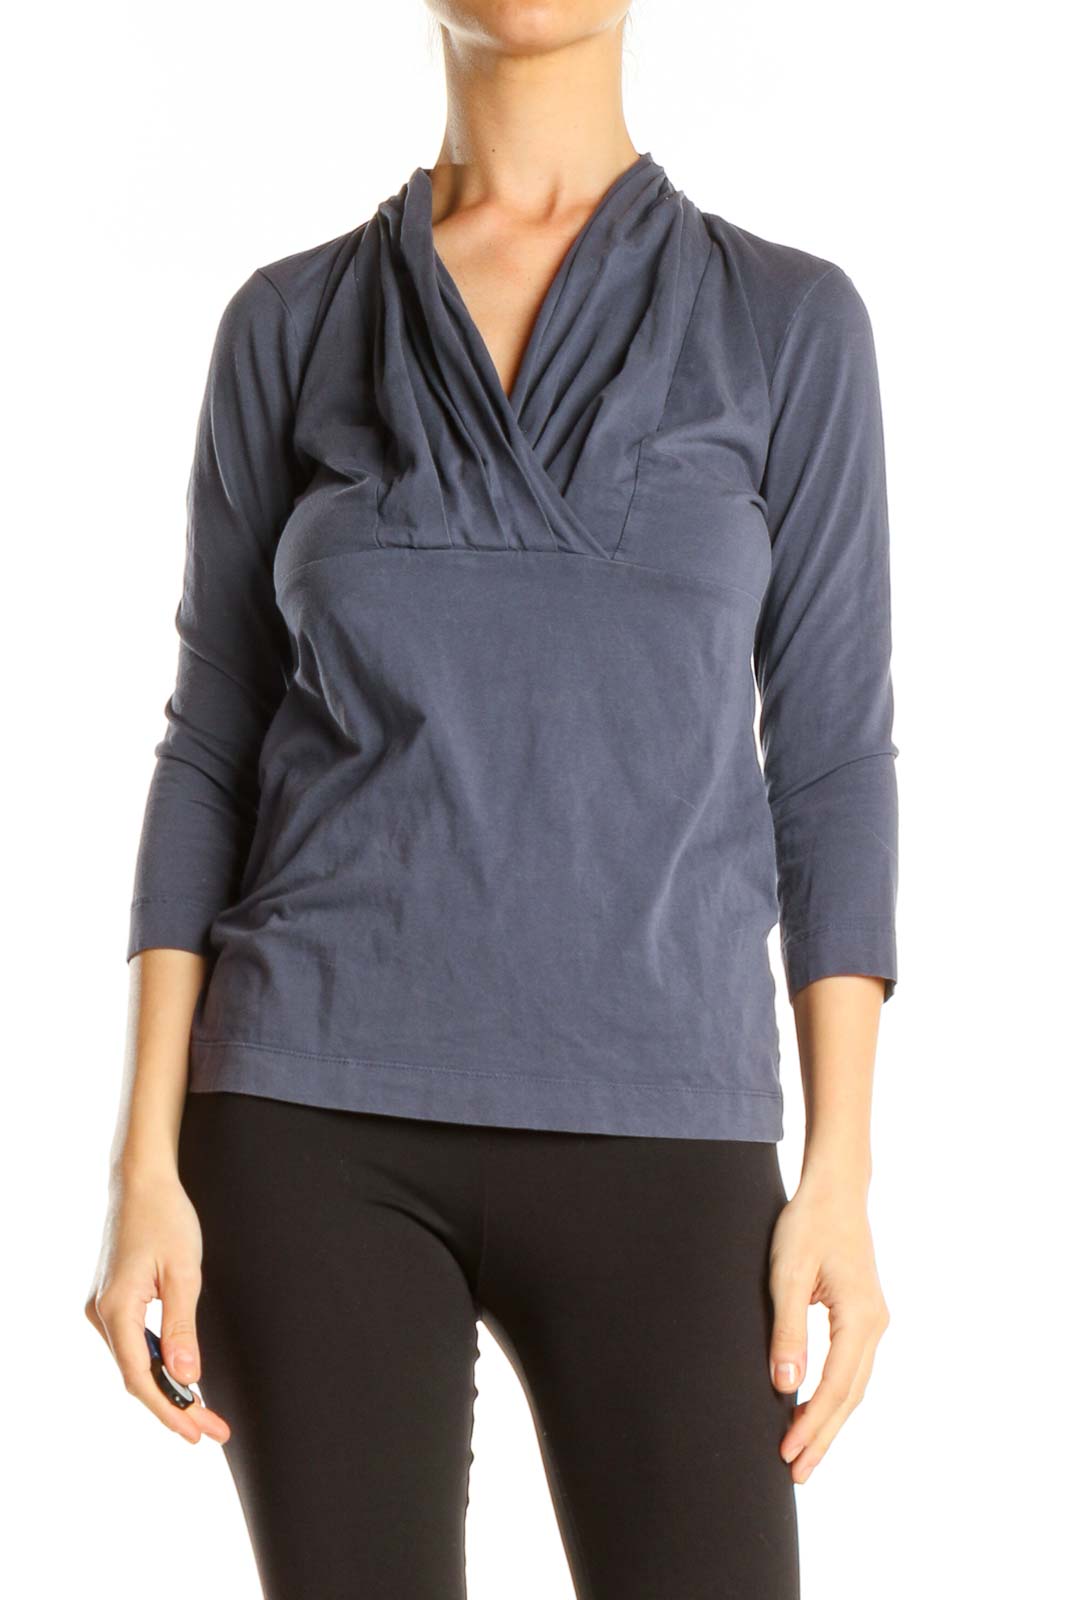 Purple Gray Casual Top Front